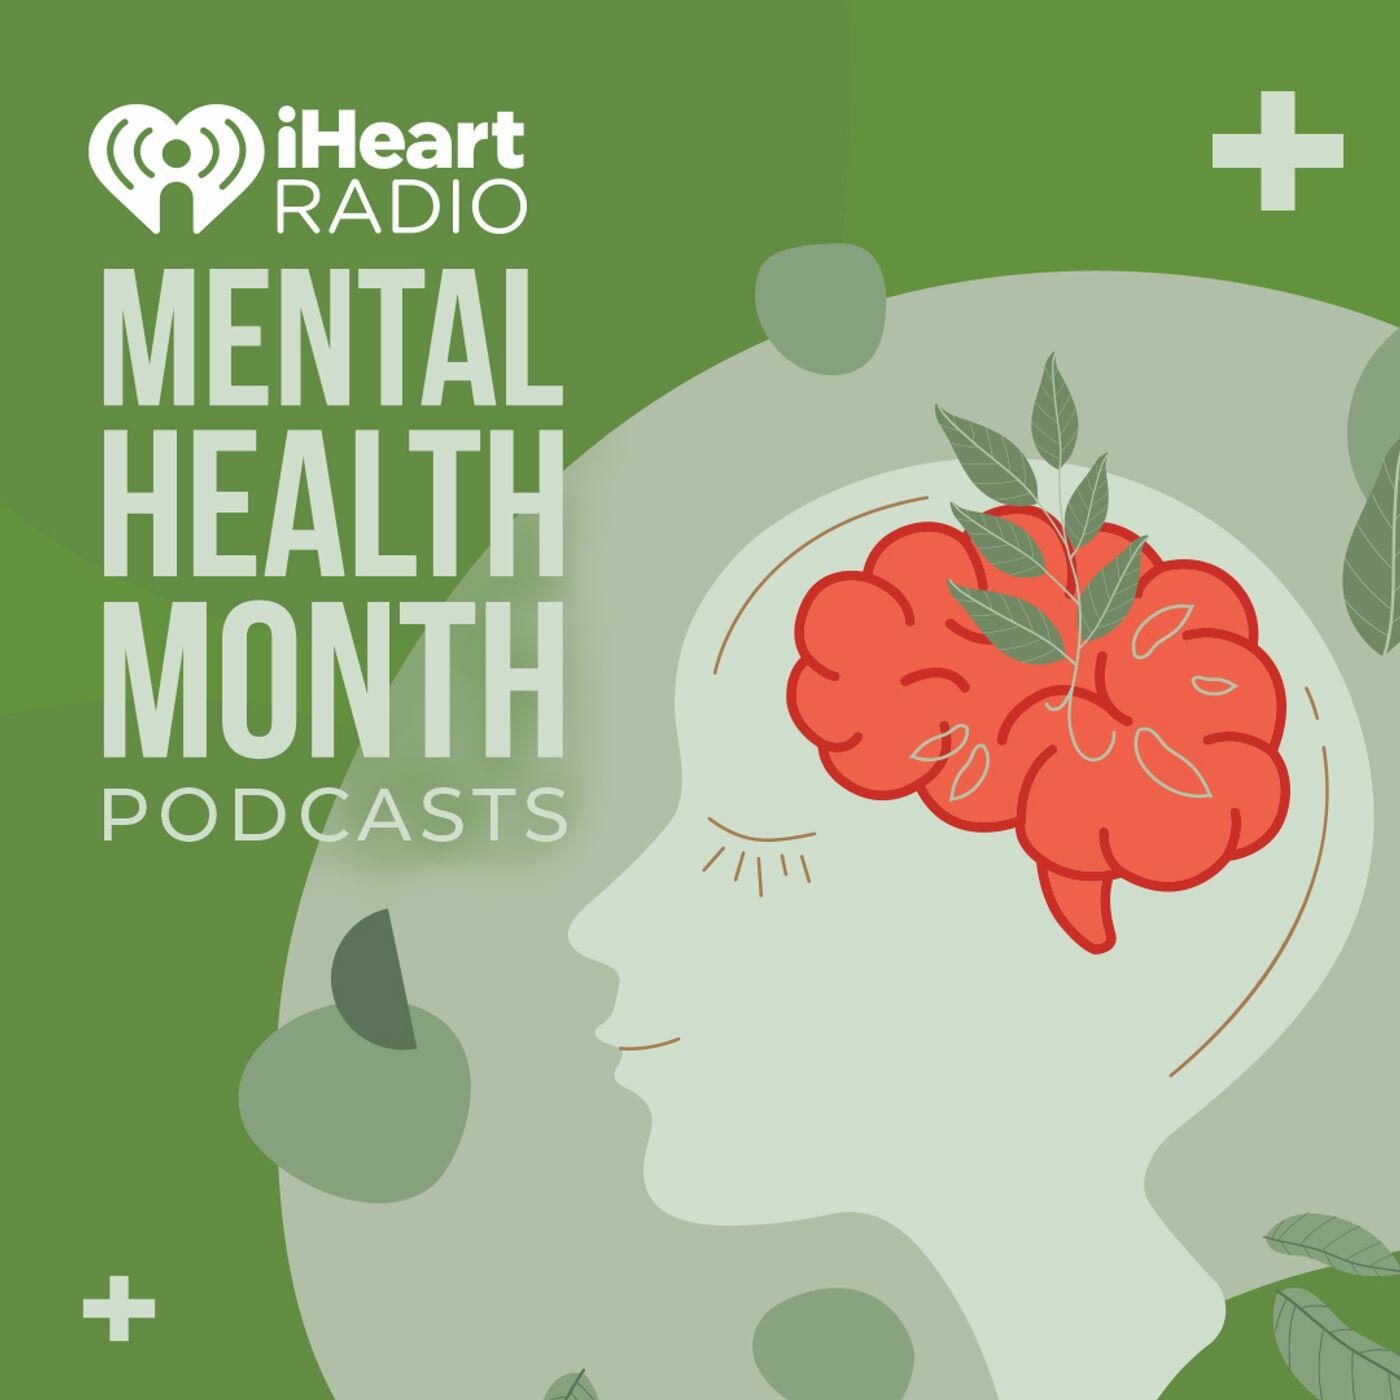 podcasts for mental health